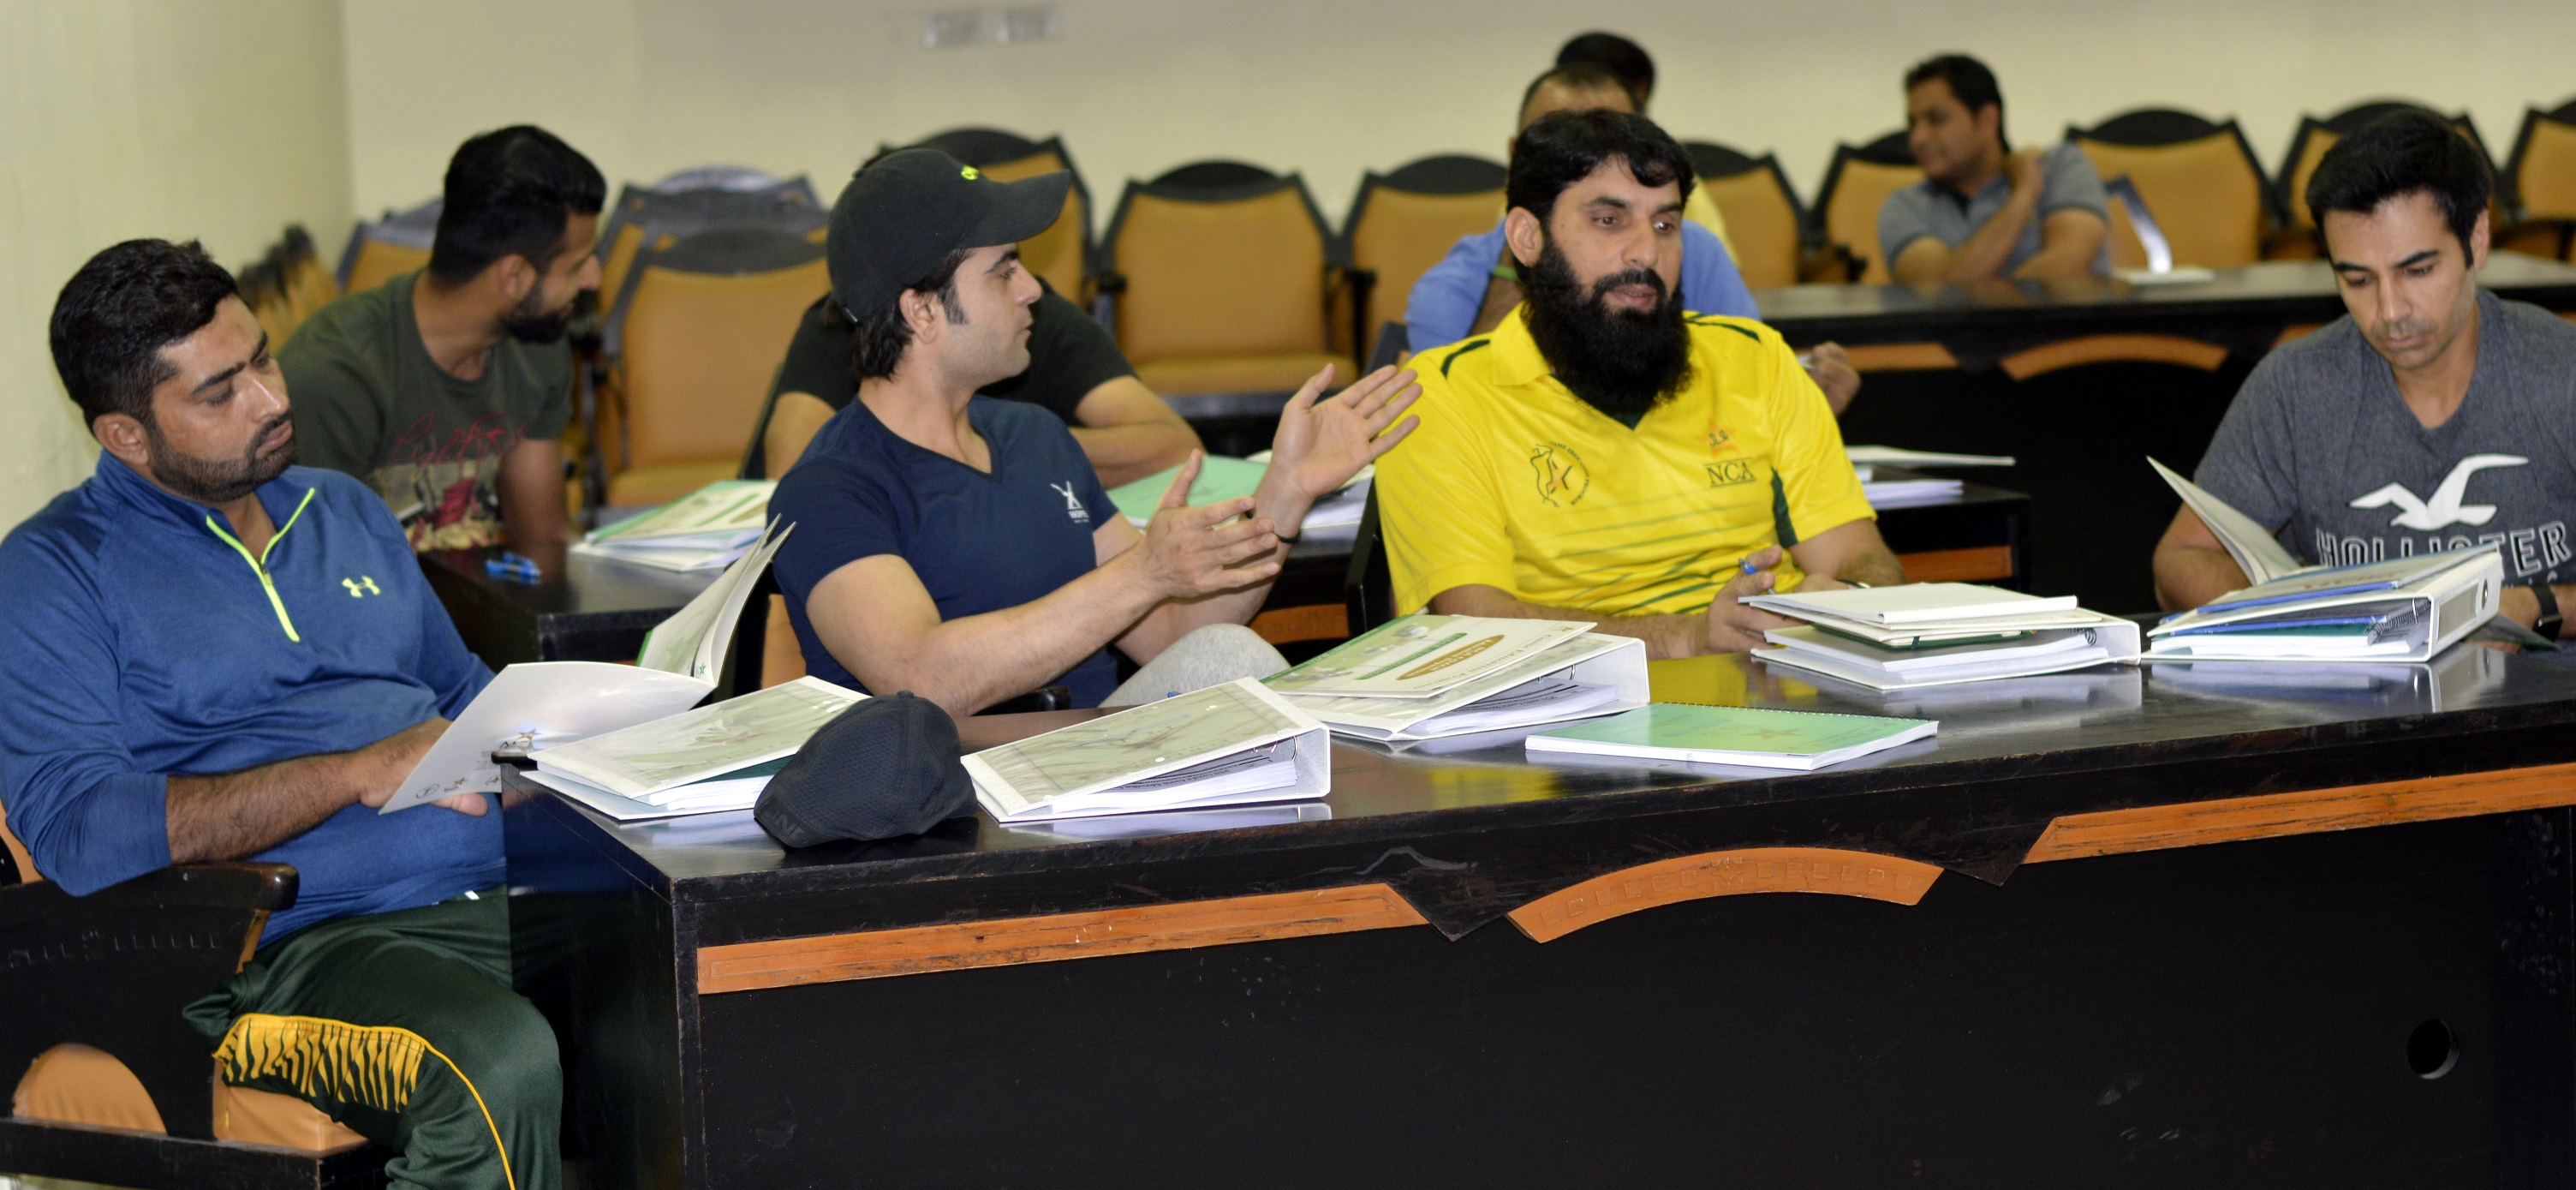 PCB Level 2 Coach Education Course commences at the NCA Press Release